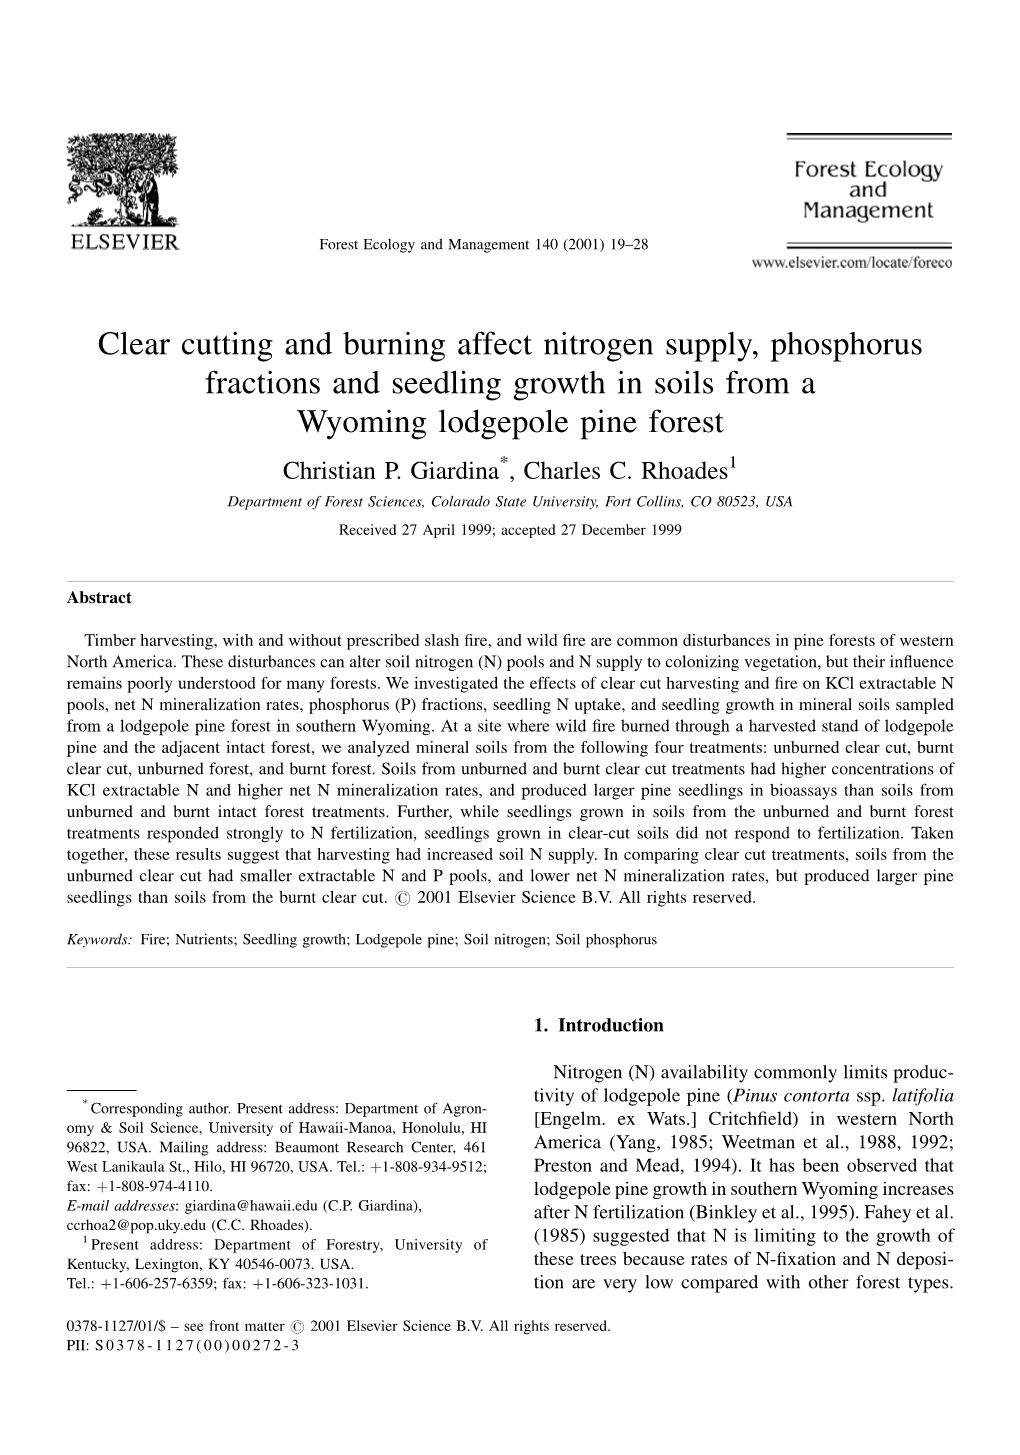 Clear Cutting and Burning Affect Nitrogen Supply, Phosphorus Fractions and Seedling Growth in Soils from a Wyoming Lodgepole Pine Forest Christian P